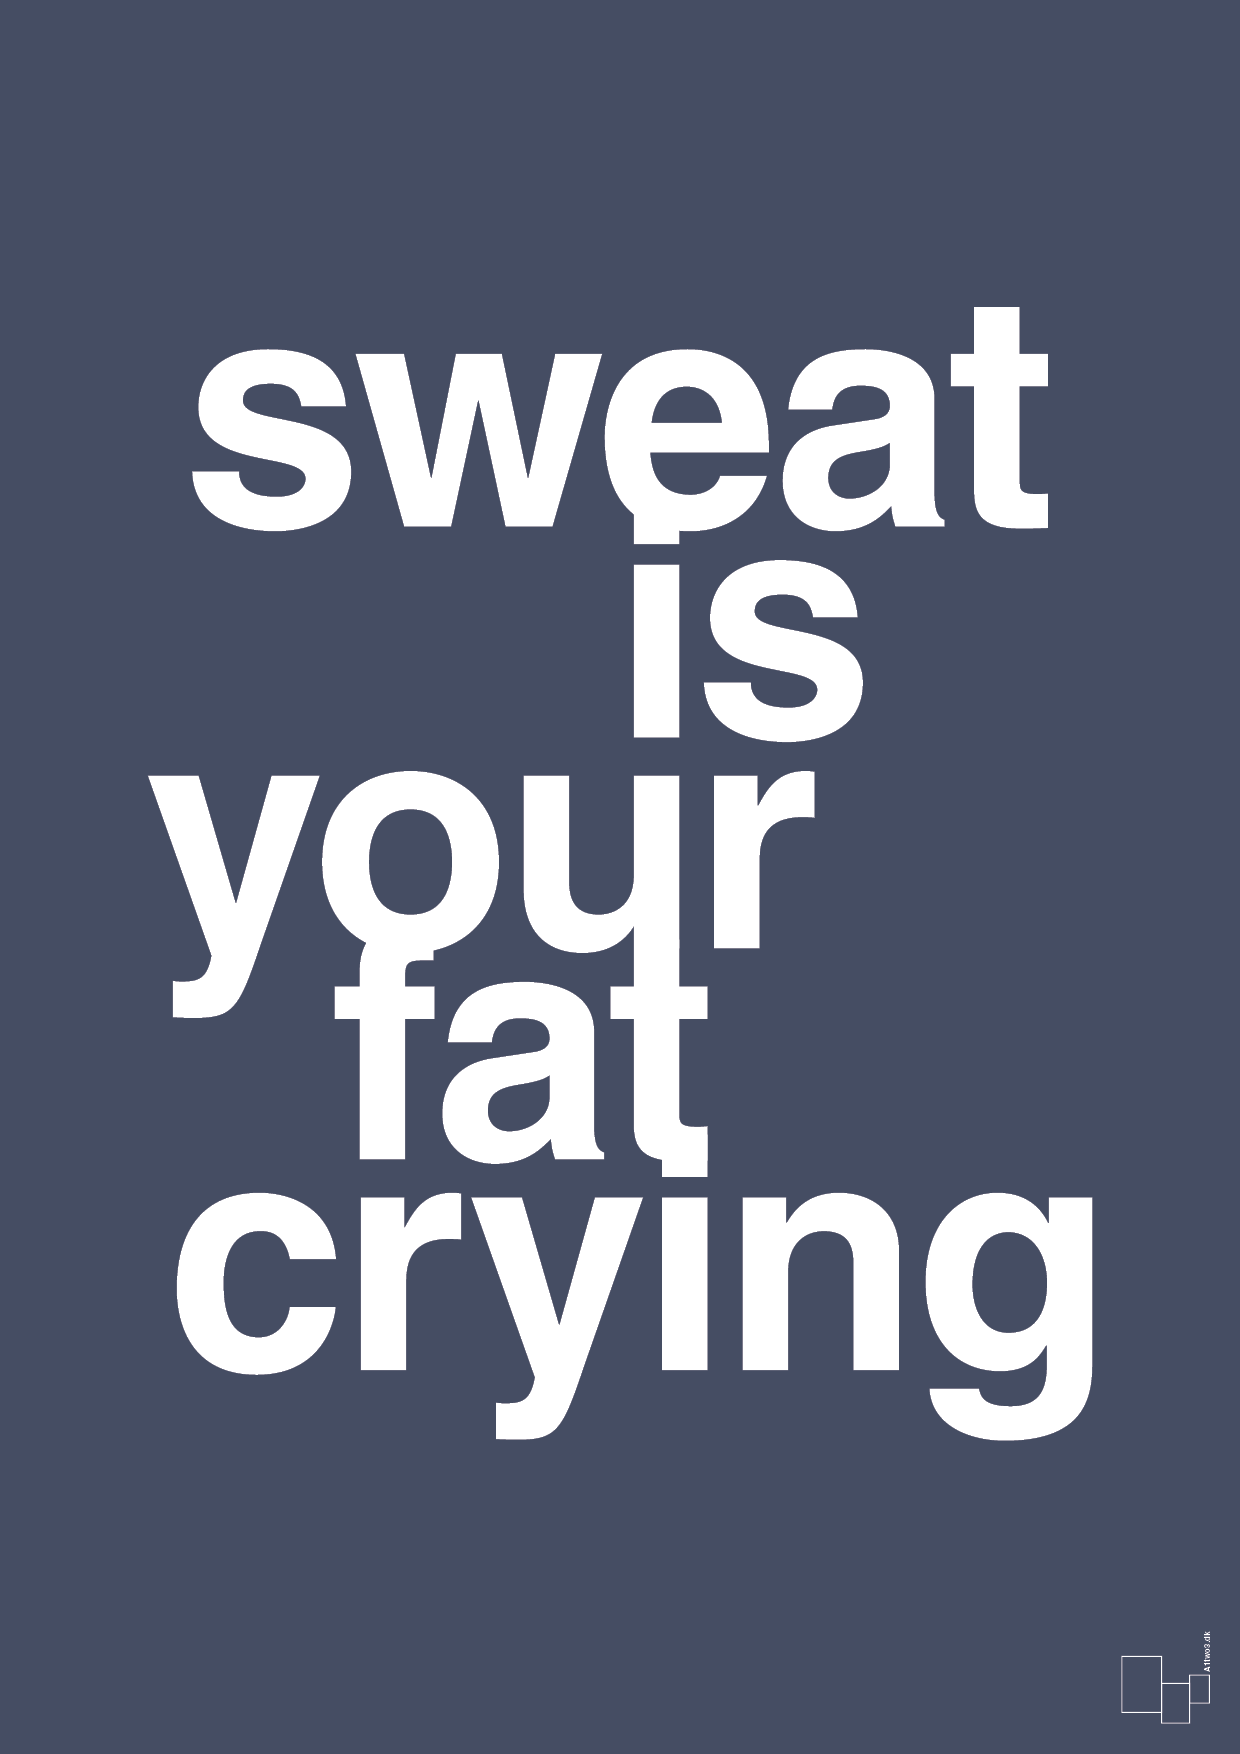 sweat is your fat crying - Plakat med Sport & Fritid i Petrol